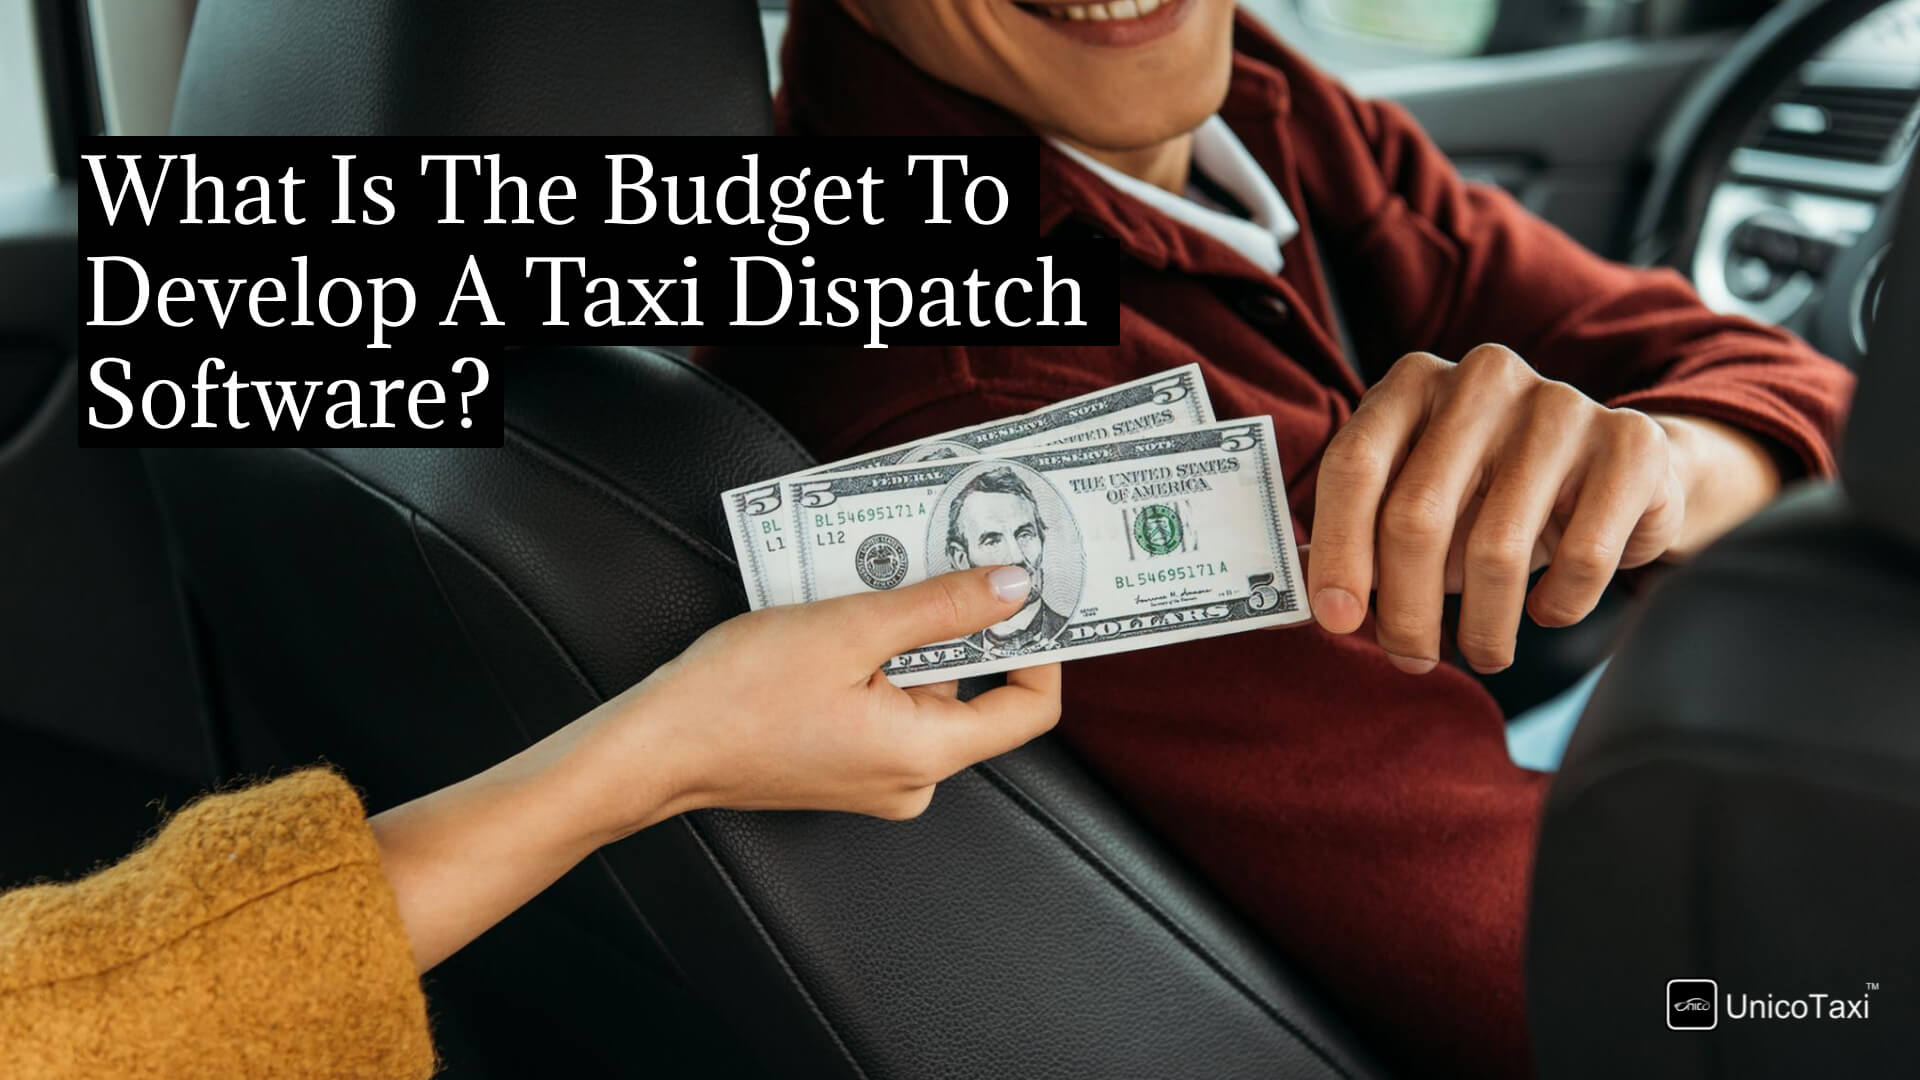 What Is the Budget to Develop a Taxi Dispatching Software in Germany?